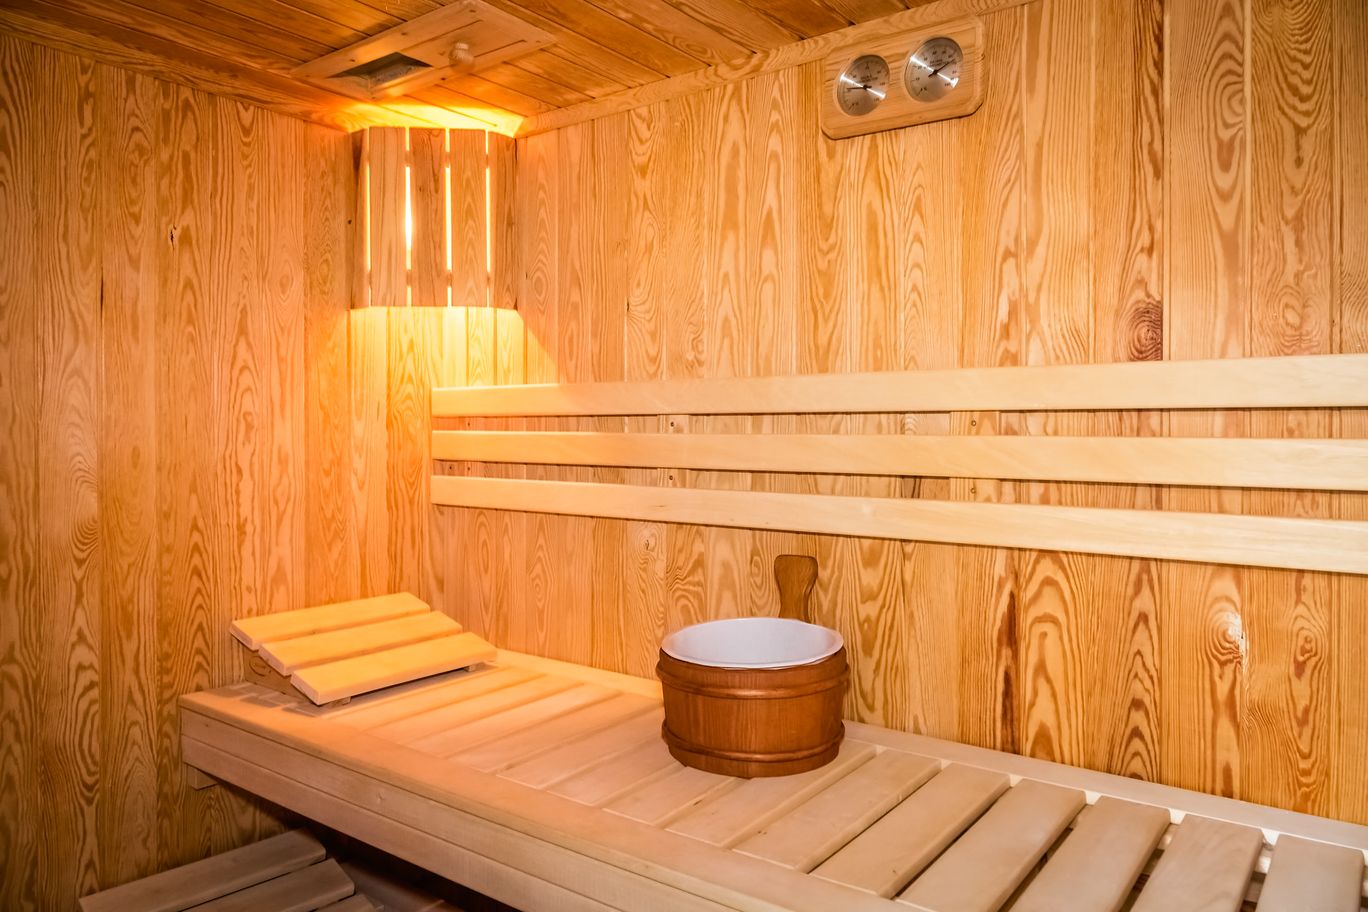 The Pros and Cons of Home Saunas